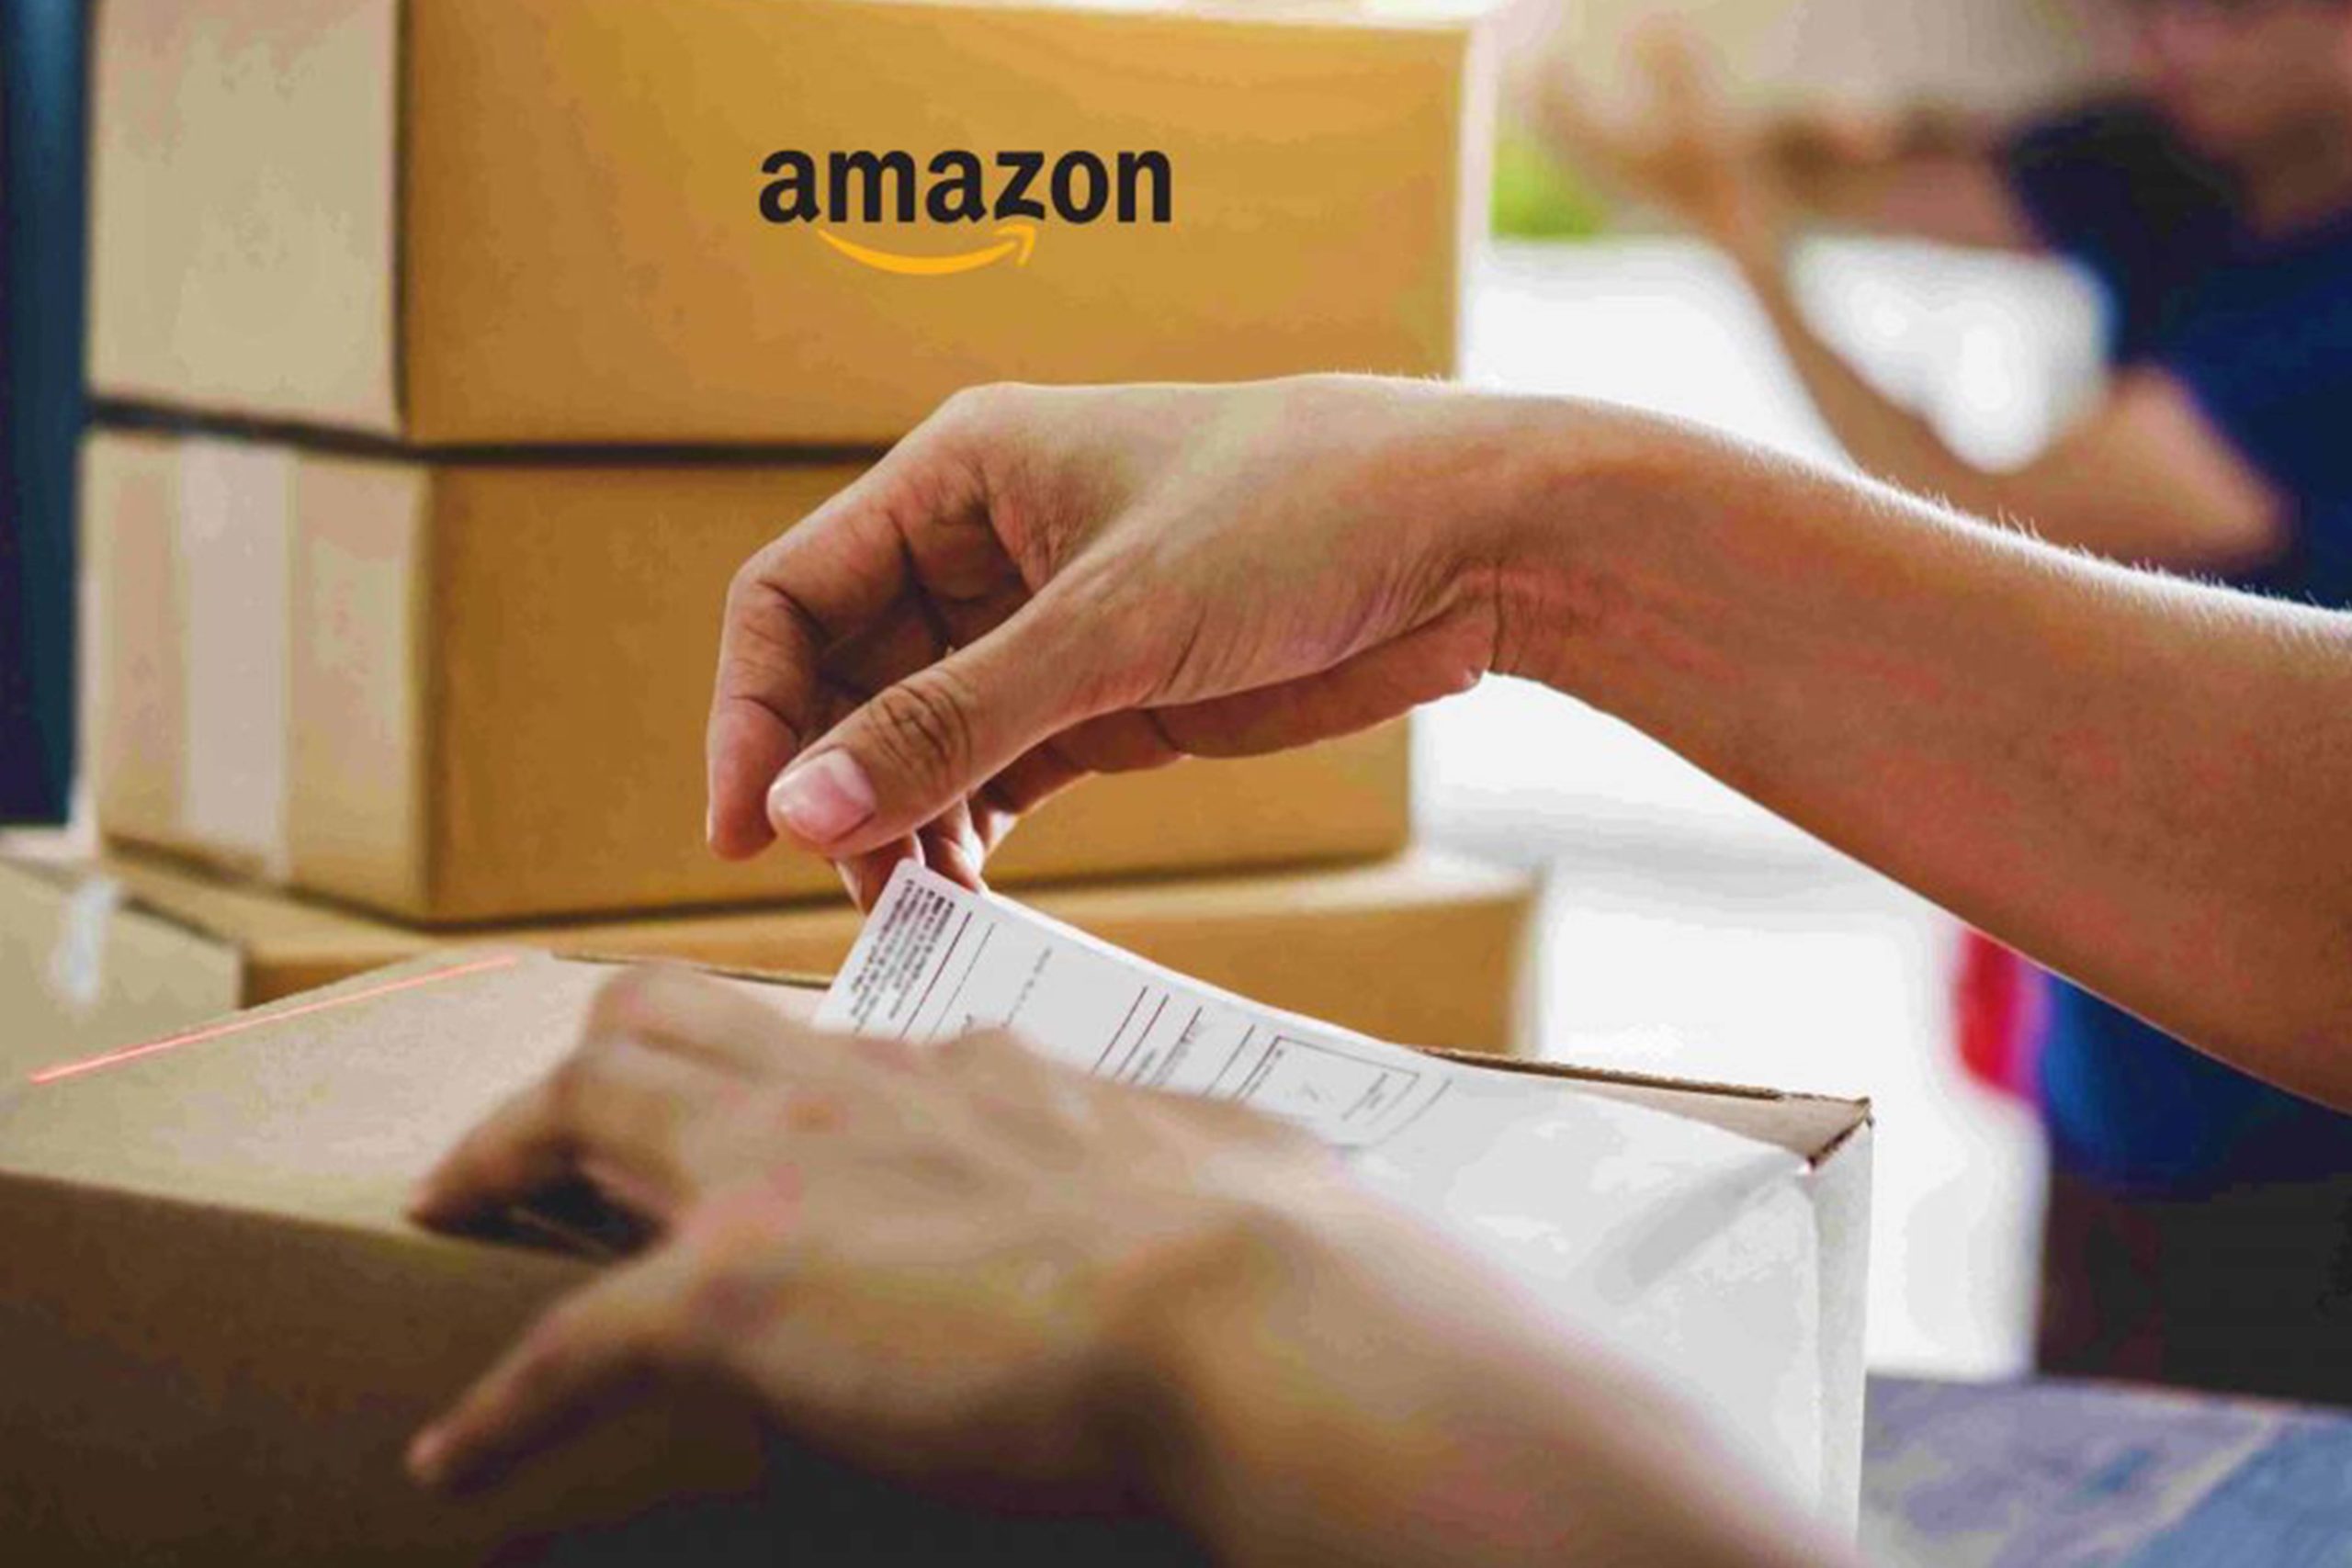 A Person's hand checking the Amazon Delivery Form